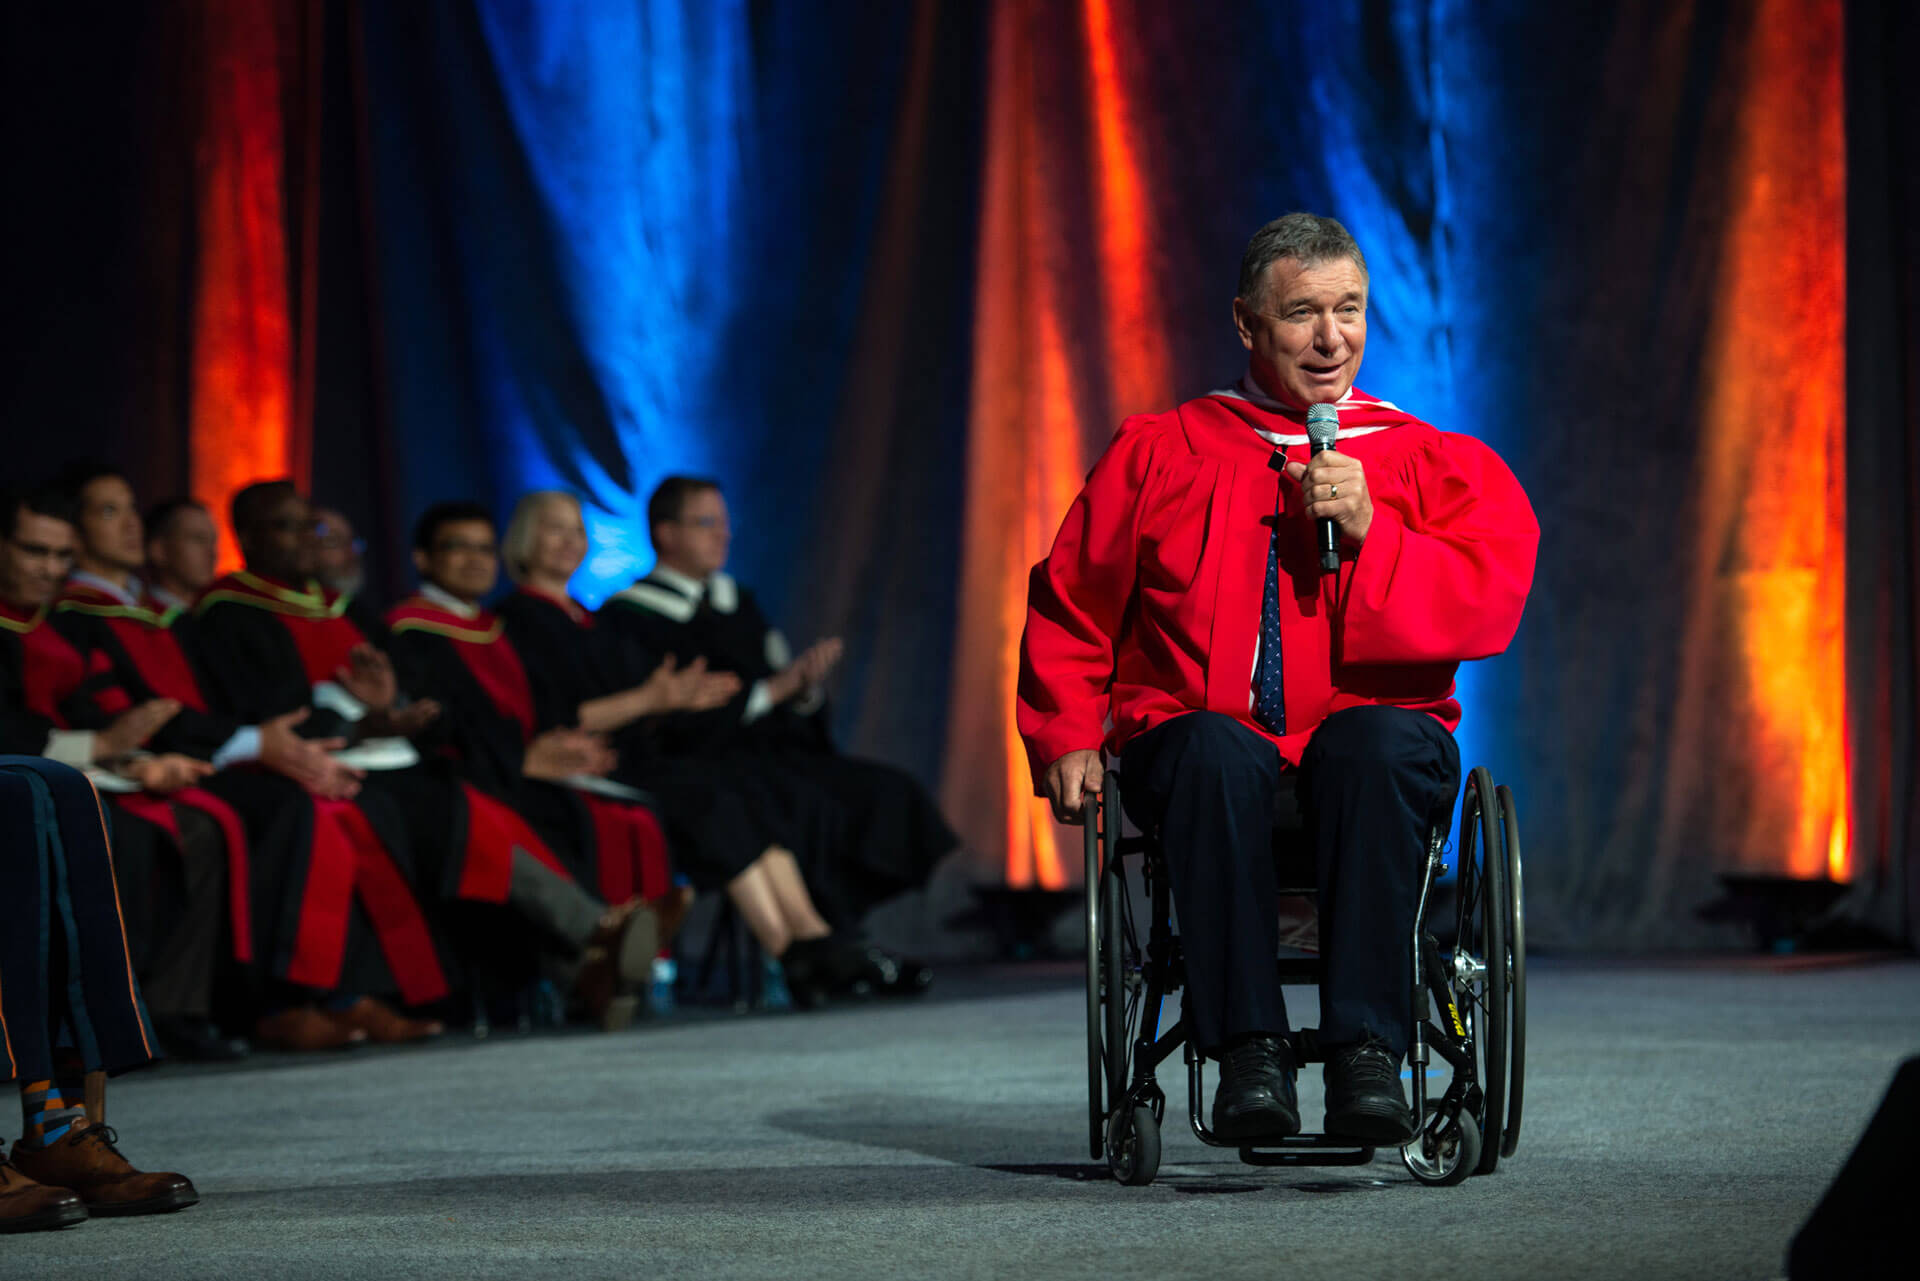 Canadian icon Rick Hansen received an honorary Doctor of Laws degree from AU in 2019.